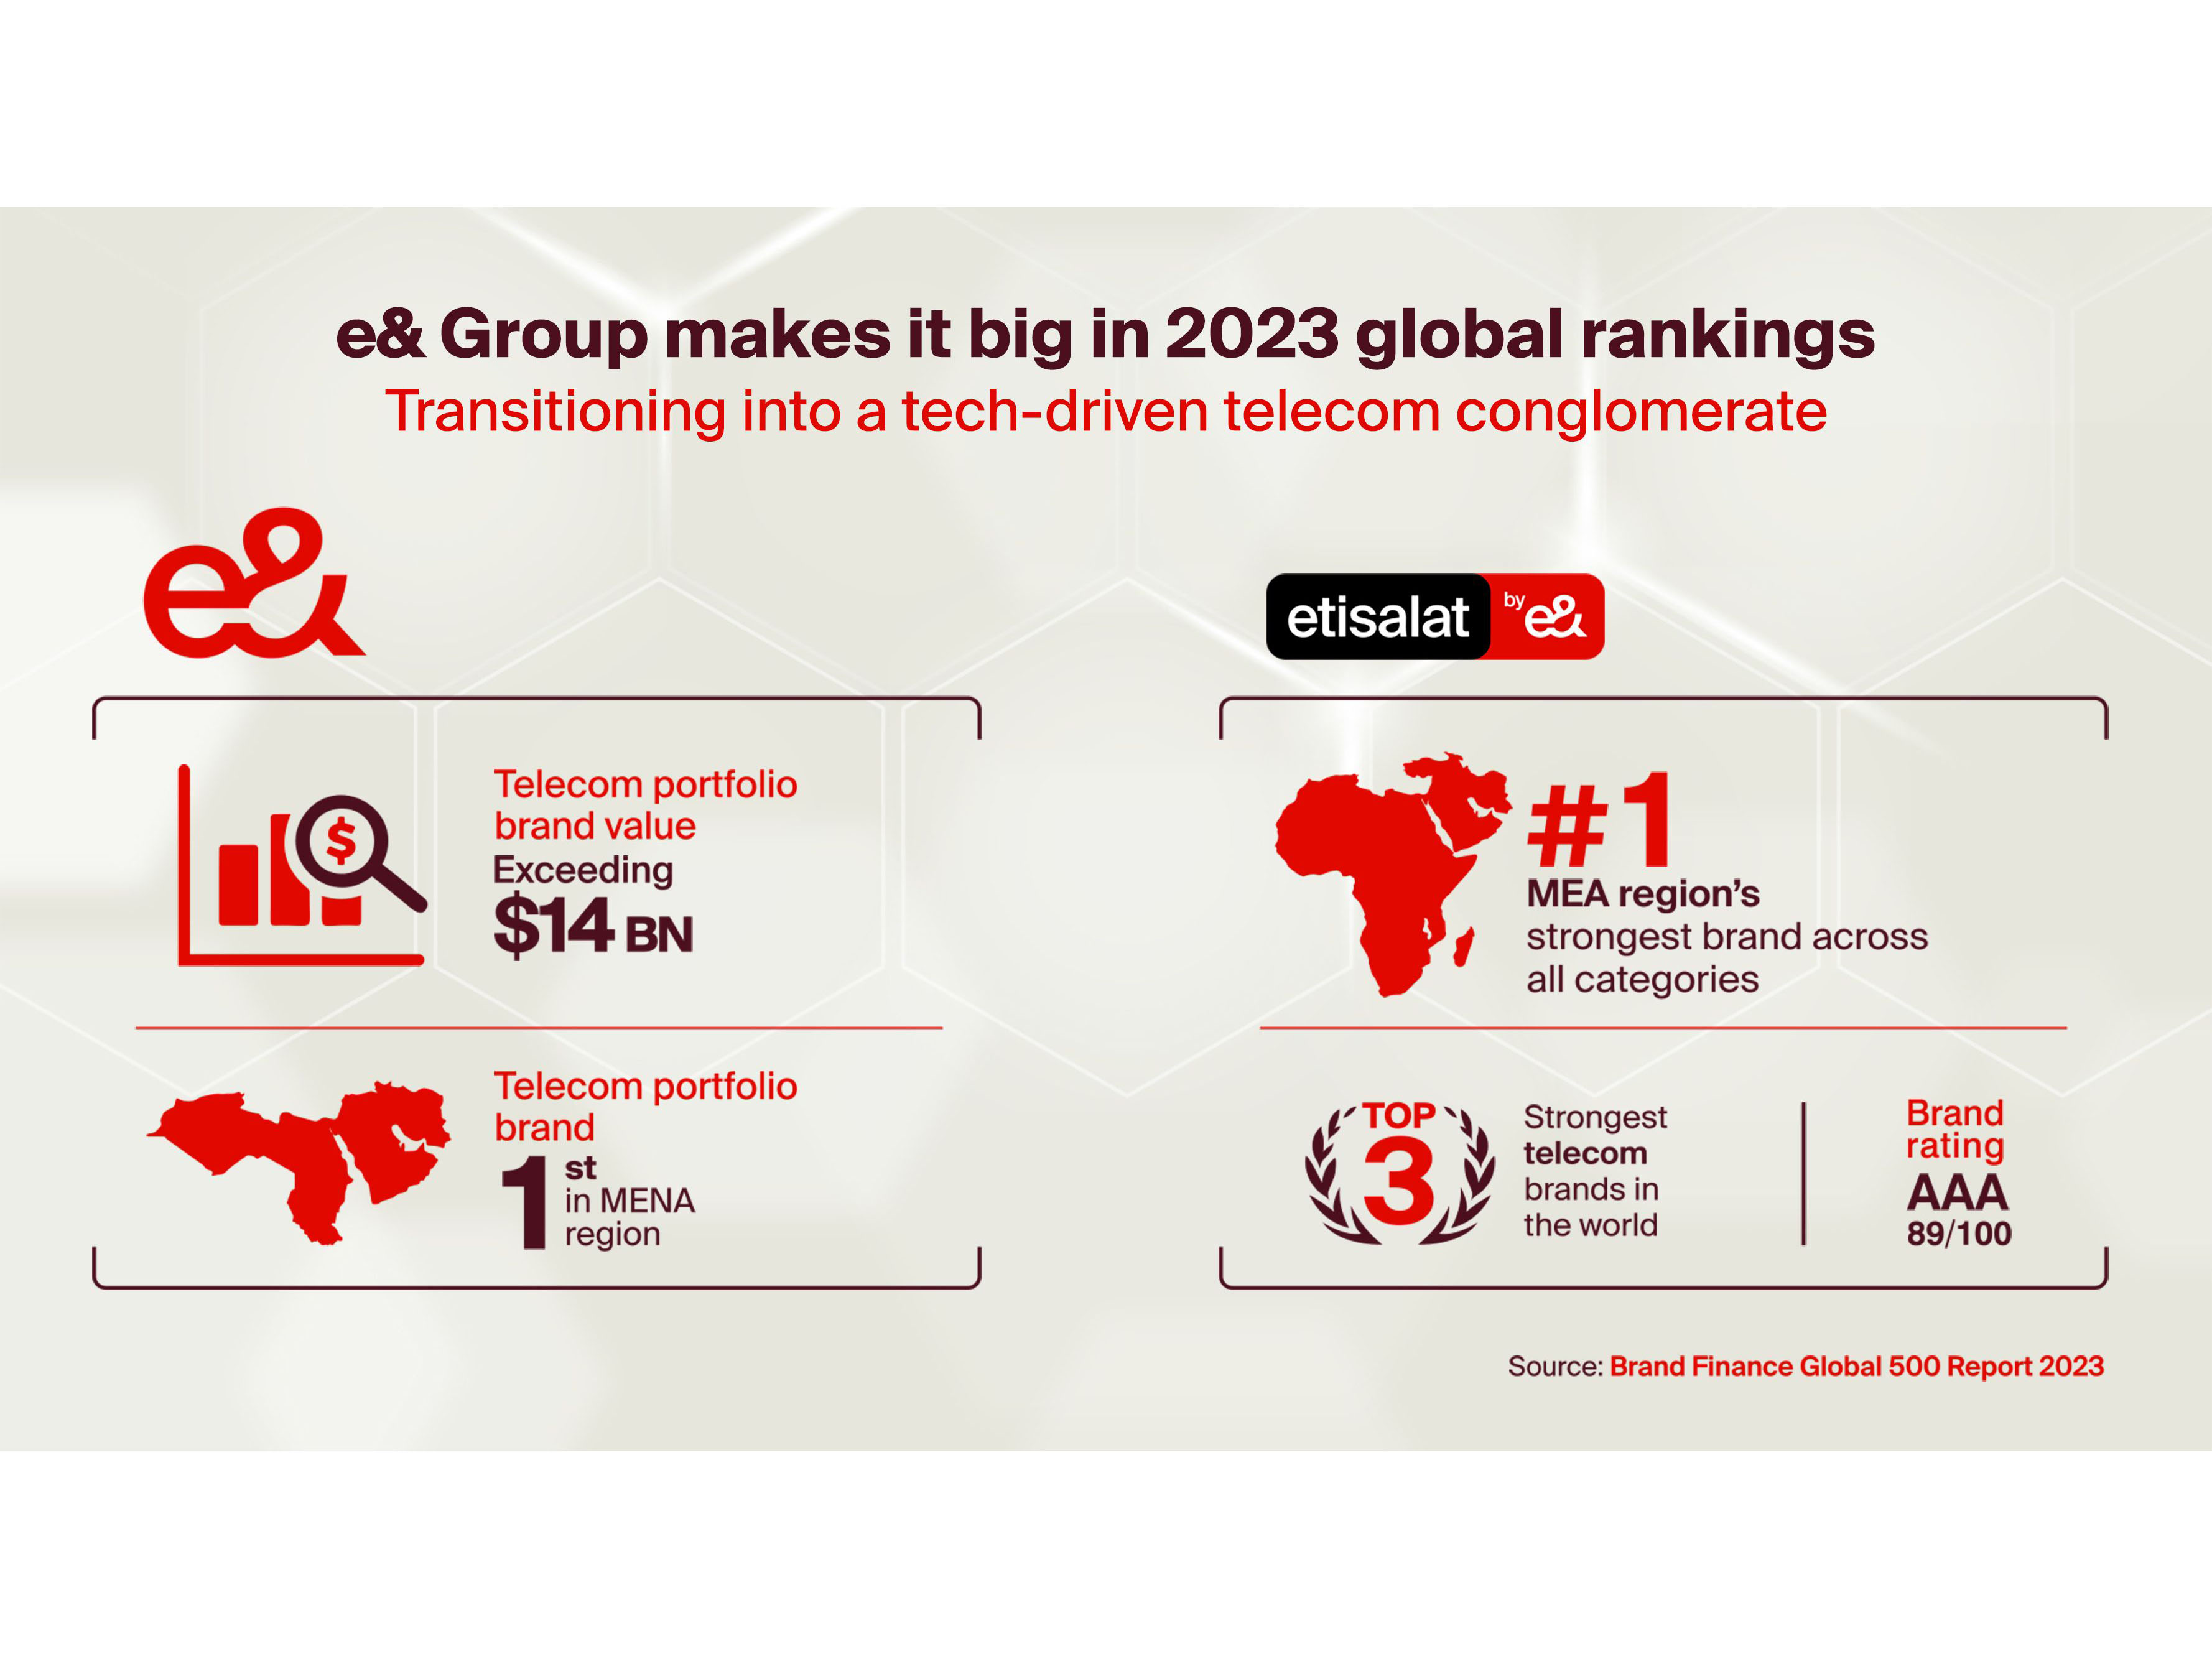 e& rated one of the top three telecom brands in the world by Brand Finance